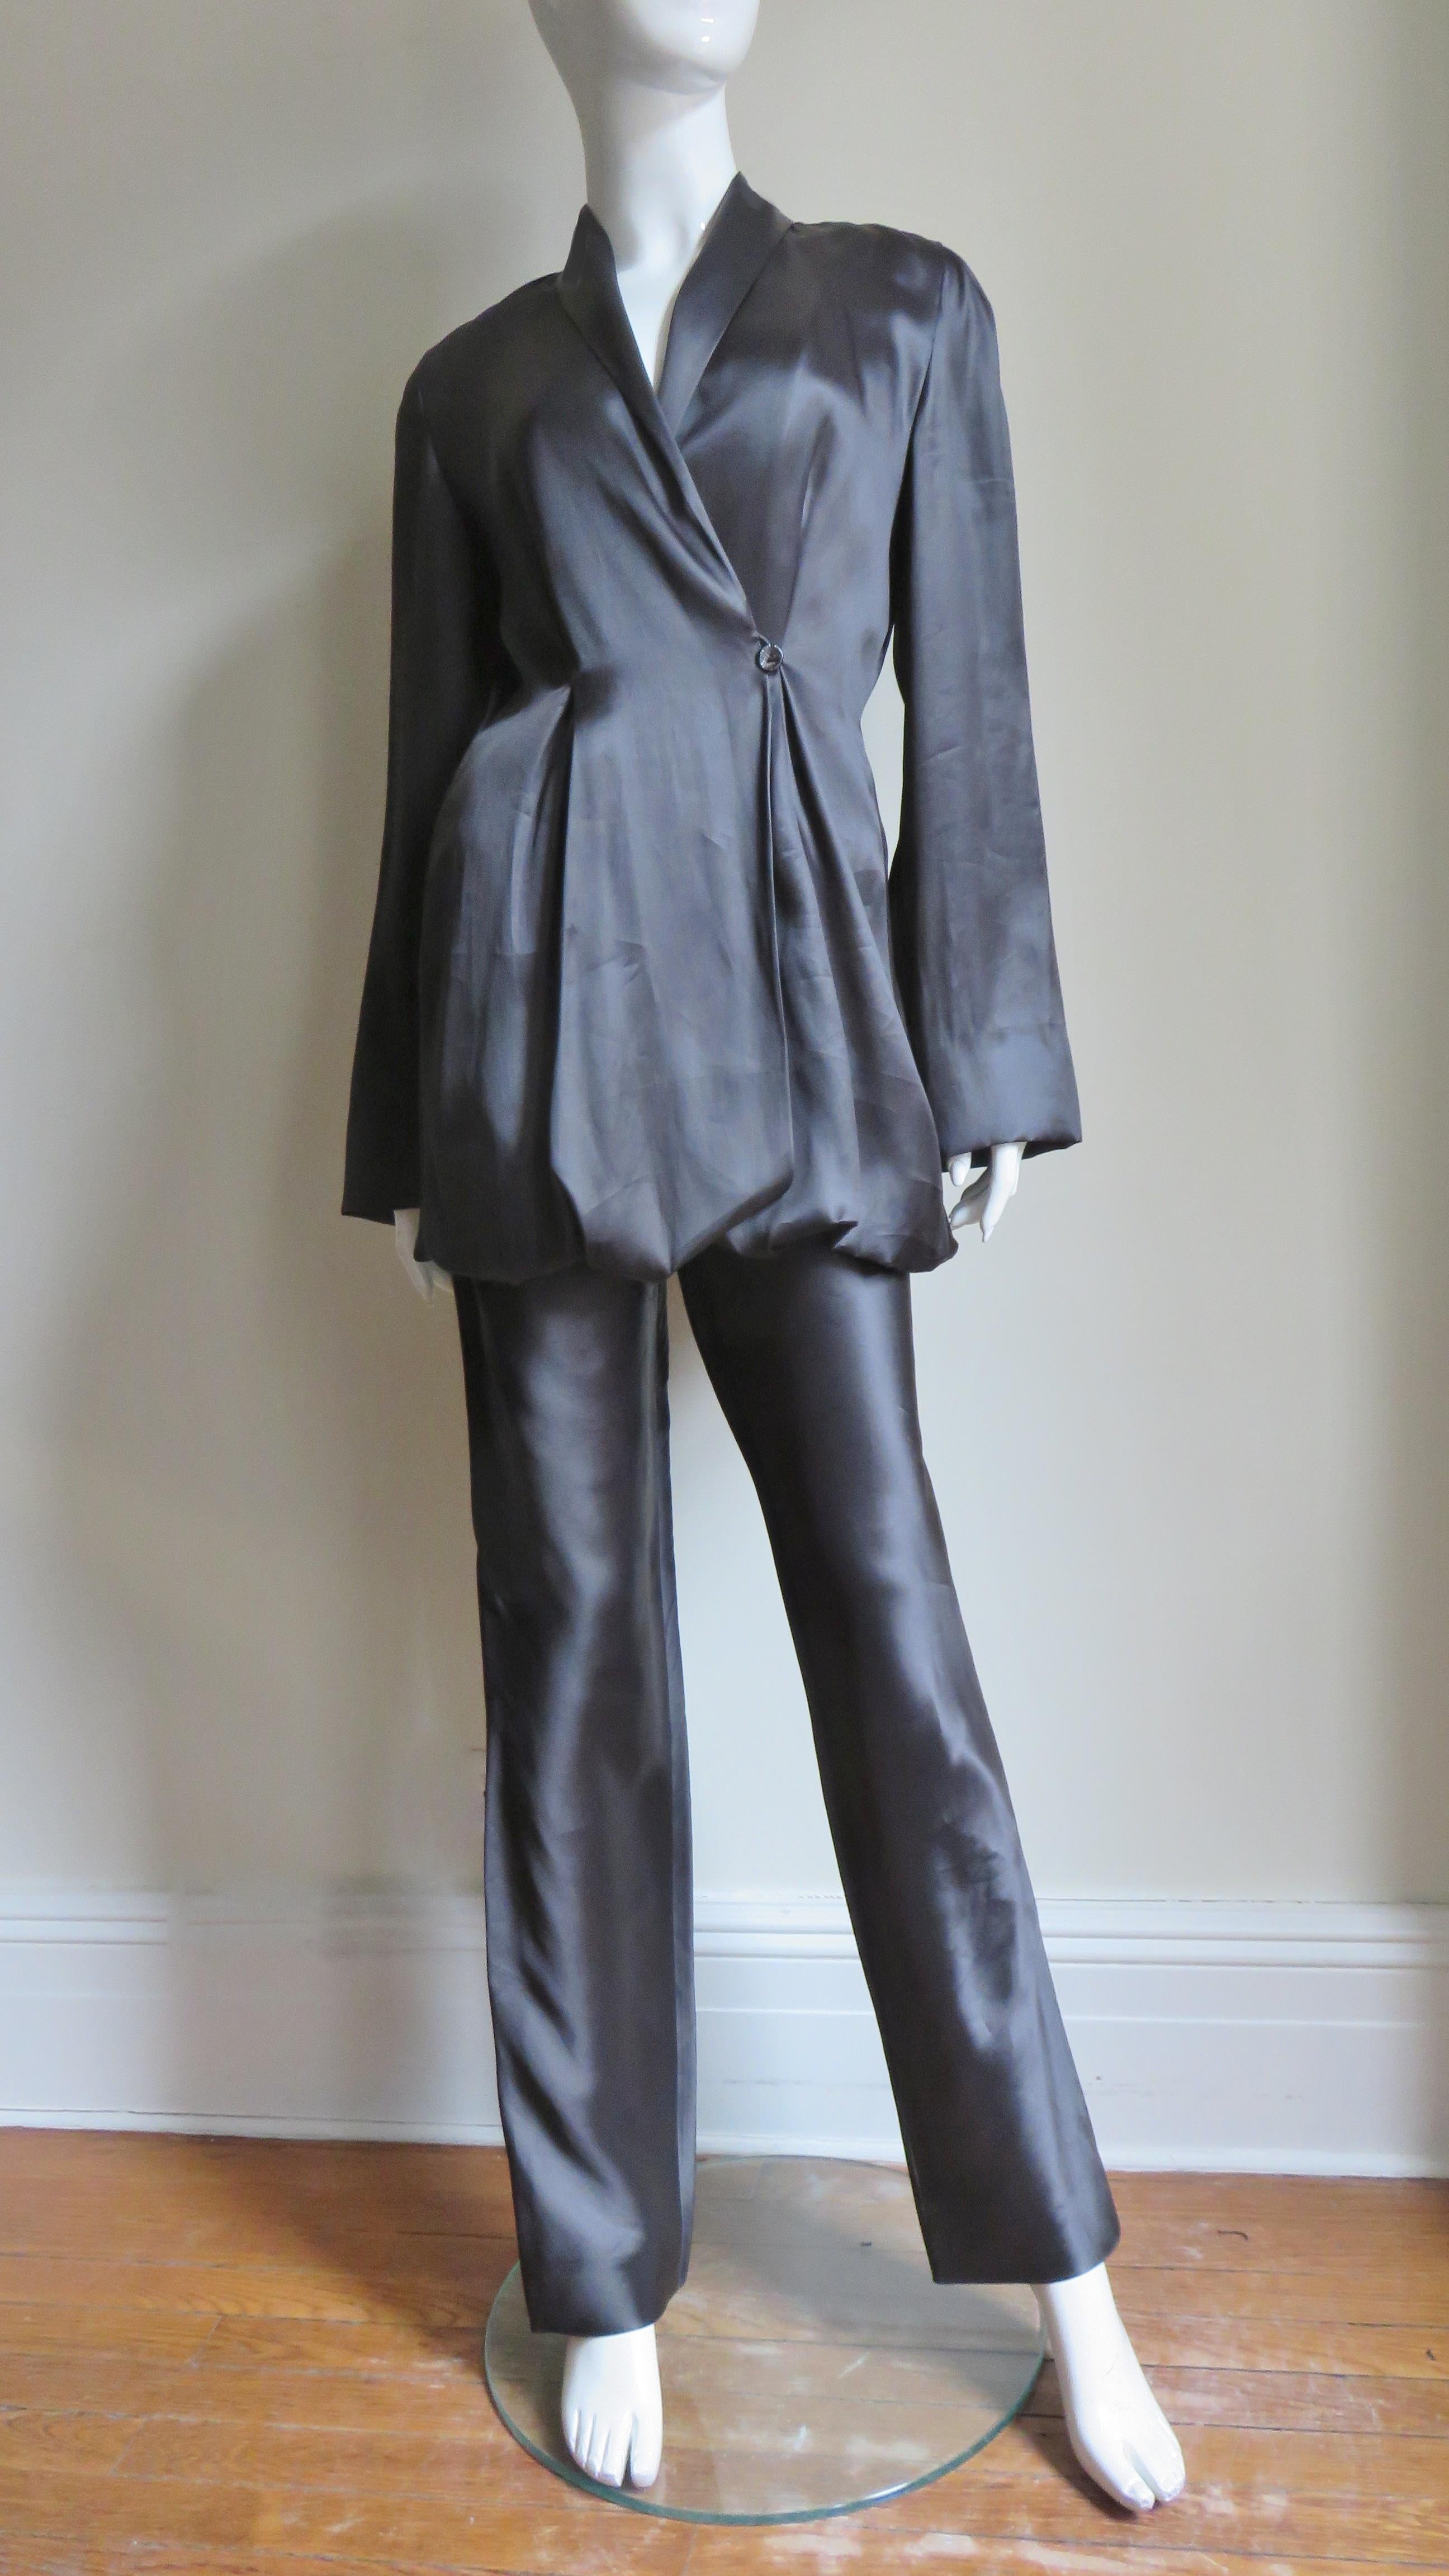 Women's Yumi Eto Silk Adjustable Parachute Jacket and Pant Suit For Sale